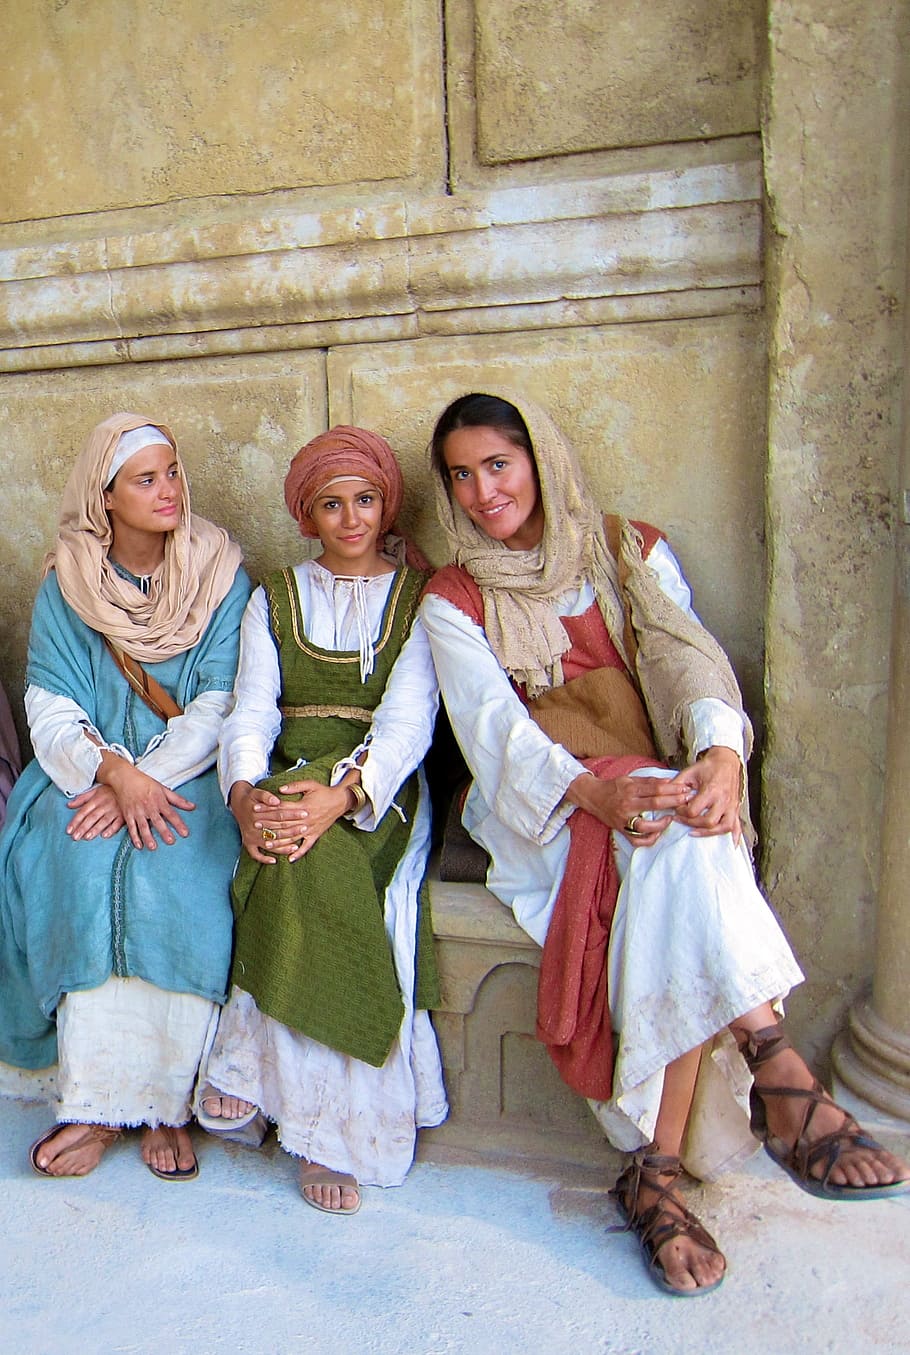 women in traditional dress sitting on brown bench next to beige painted wall during daytime